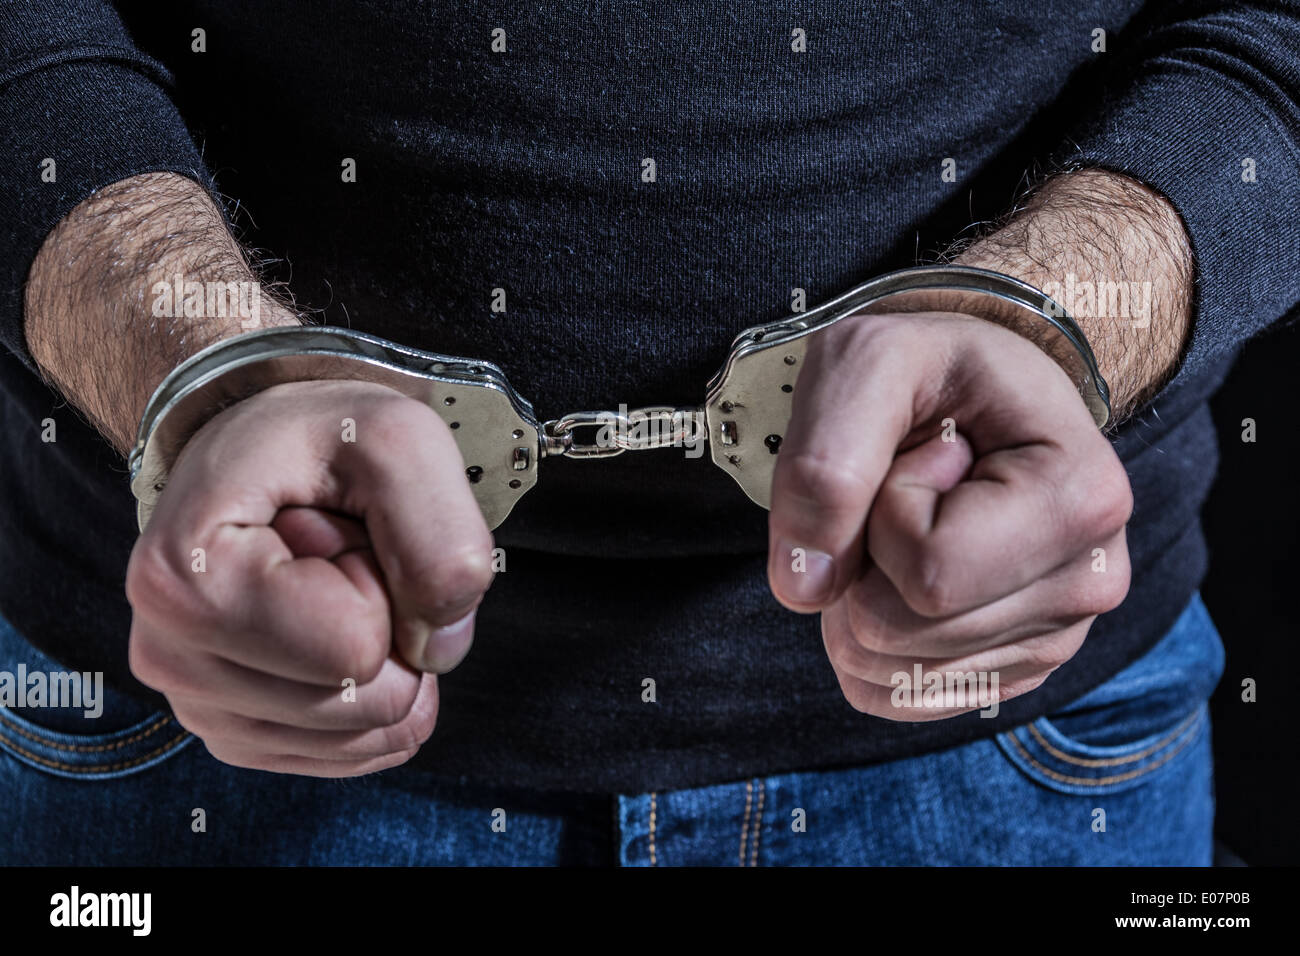 a thief arrested with handcuffs and wearing a black shirt Stock Photo